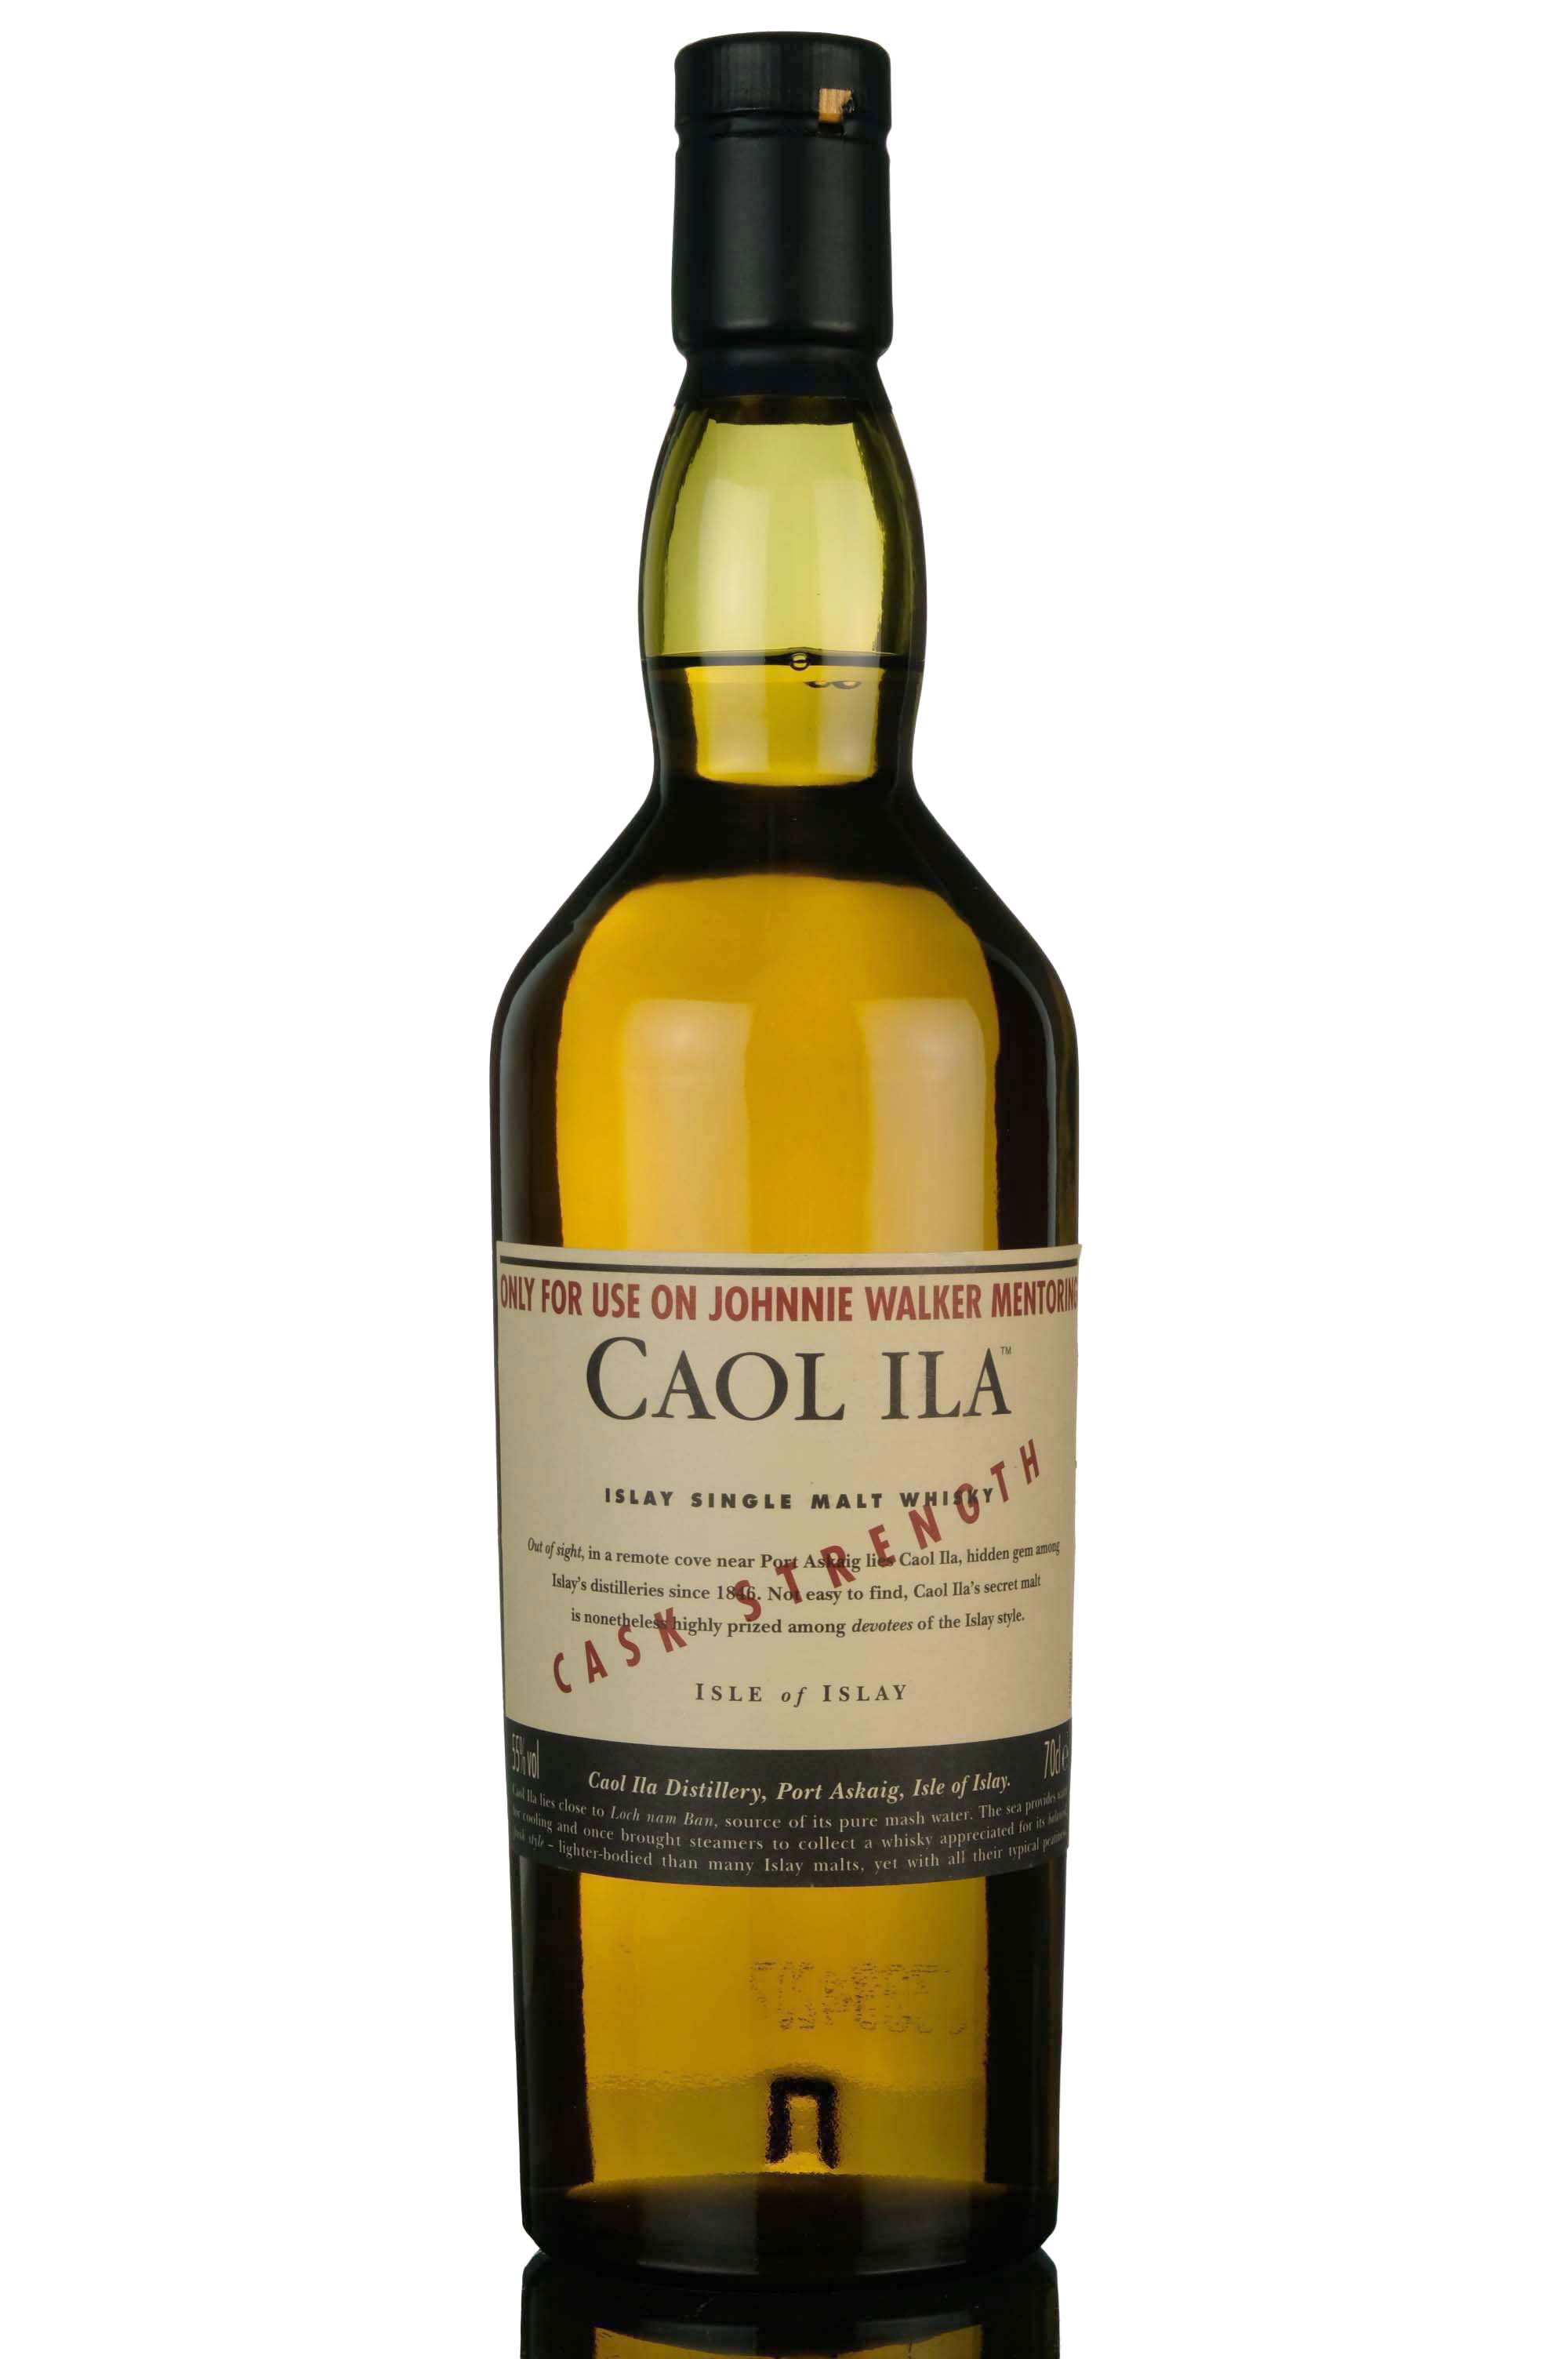 Caol Ila Cask Strength - Only for use on Johnnie Walker Mentoring